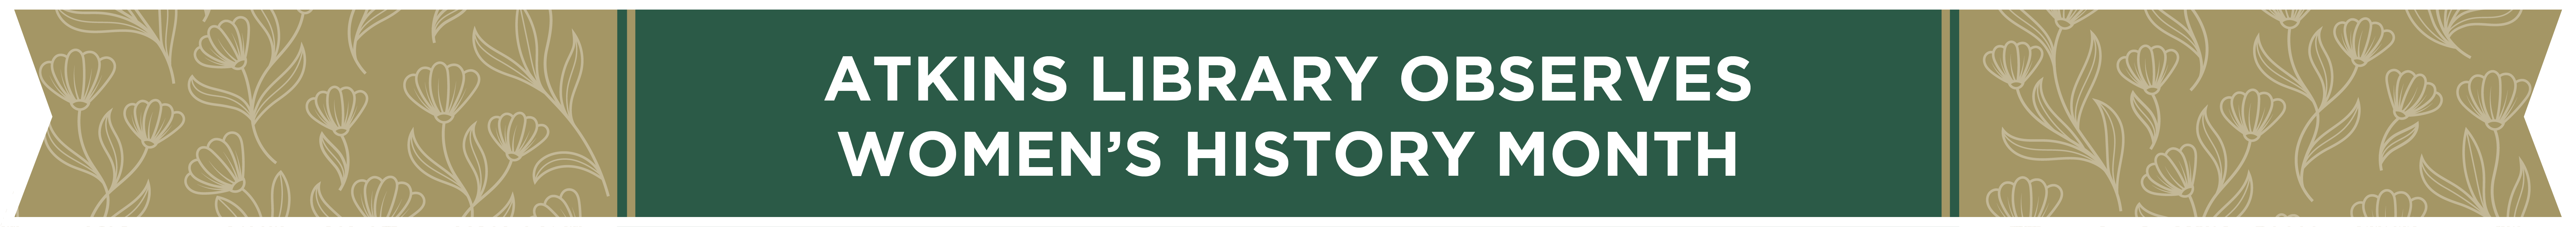 Atkins Library Celebrates Womens History Month